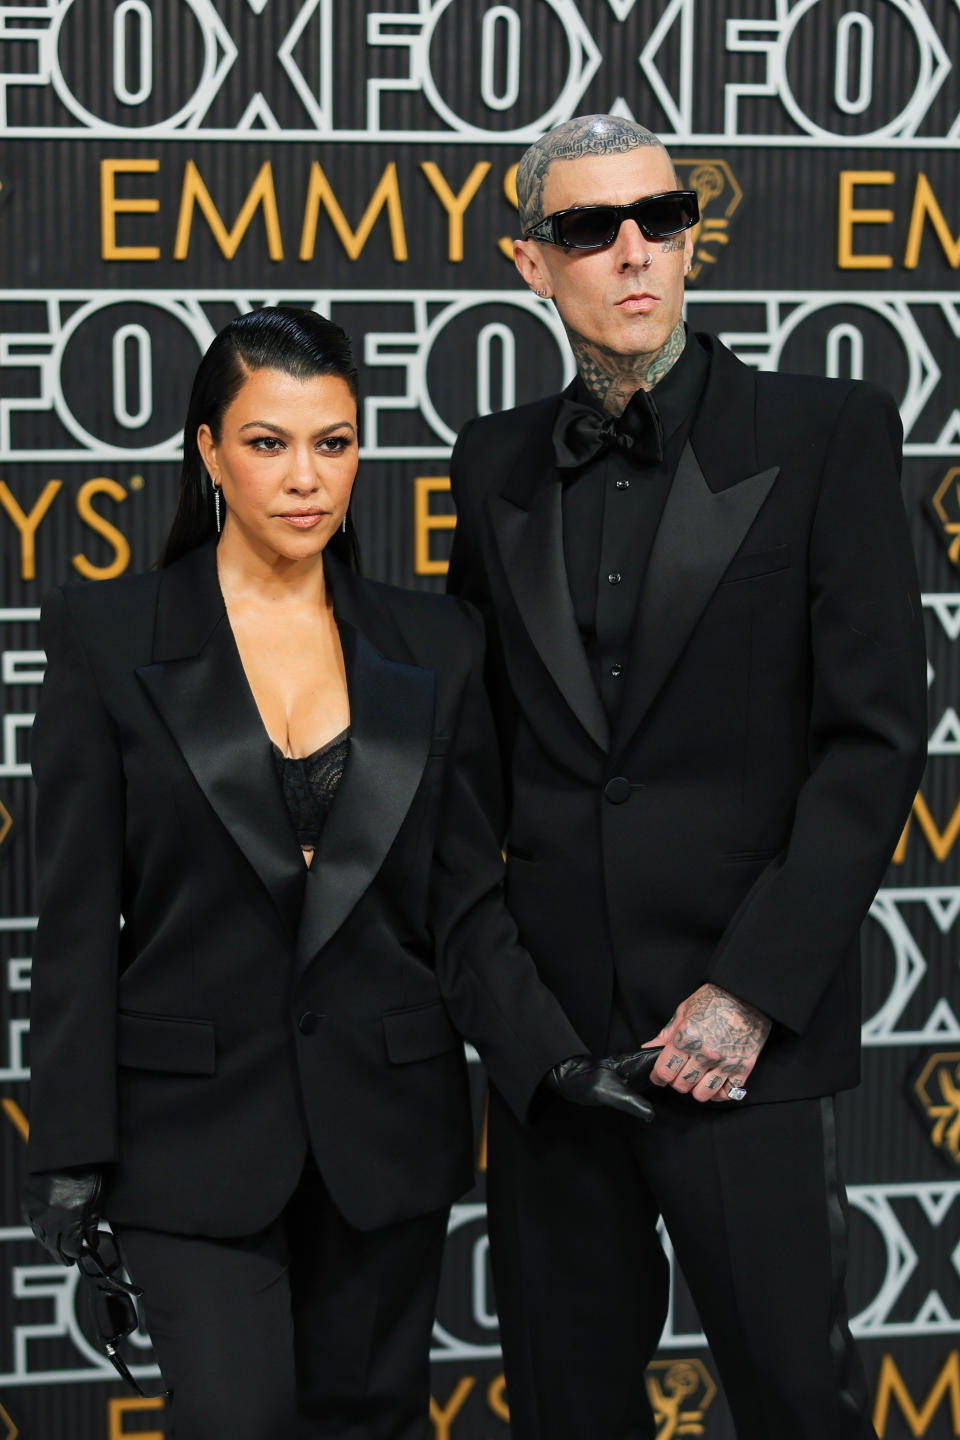 LOS ANGELES, CALIFORNIA - JANUARY 15: (L-R) Kourtney Kardashian and Travis Barker attend the 75th Primetime Emmy Awards at Peacock Theater on January 15, 2024 in Los Angeles, California. (Photo by Neilson Barnard/Getty Images)